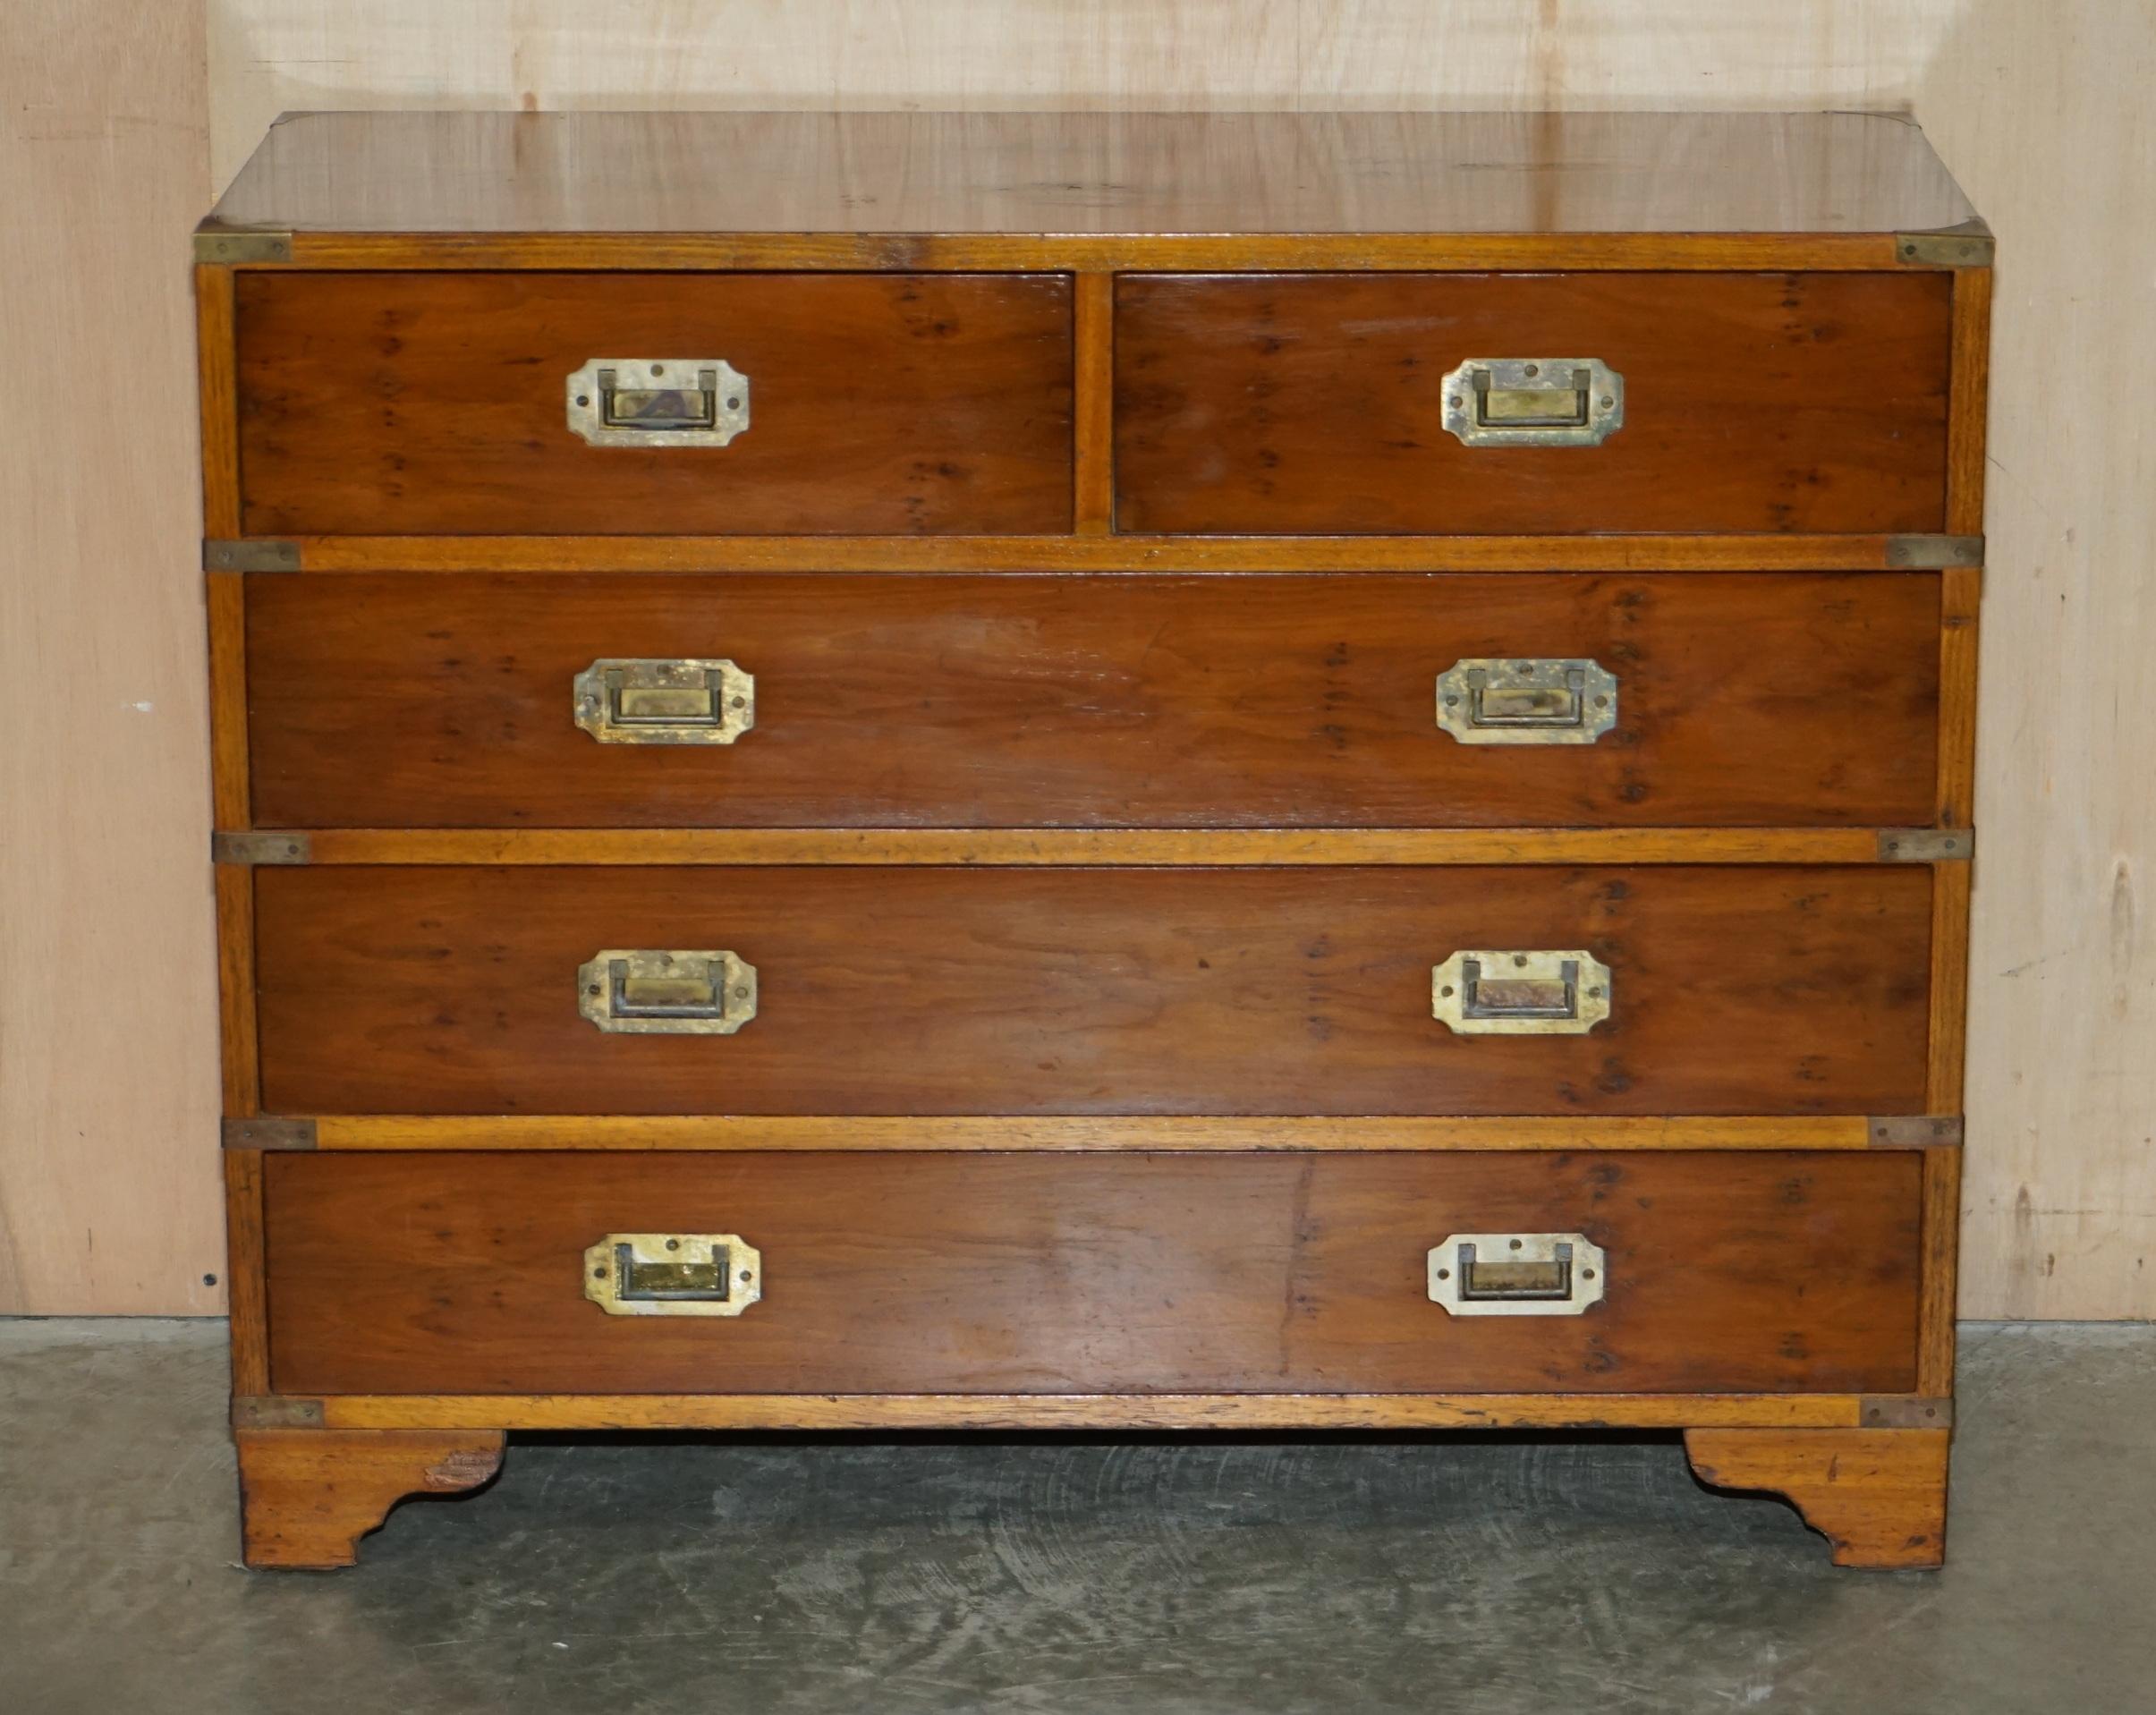 We are delighted to offer for sale this stunning, vintage Burr Yew wood Military Campaign chest of drawers

A well made good looking and decorative piece, it has a wonderful timber patina and is of course a super fashionable piece of furniture